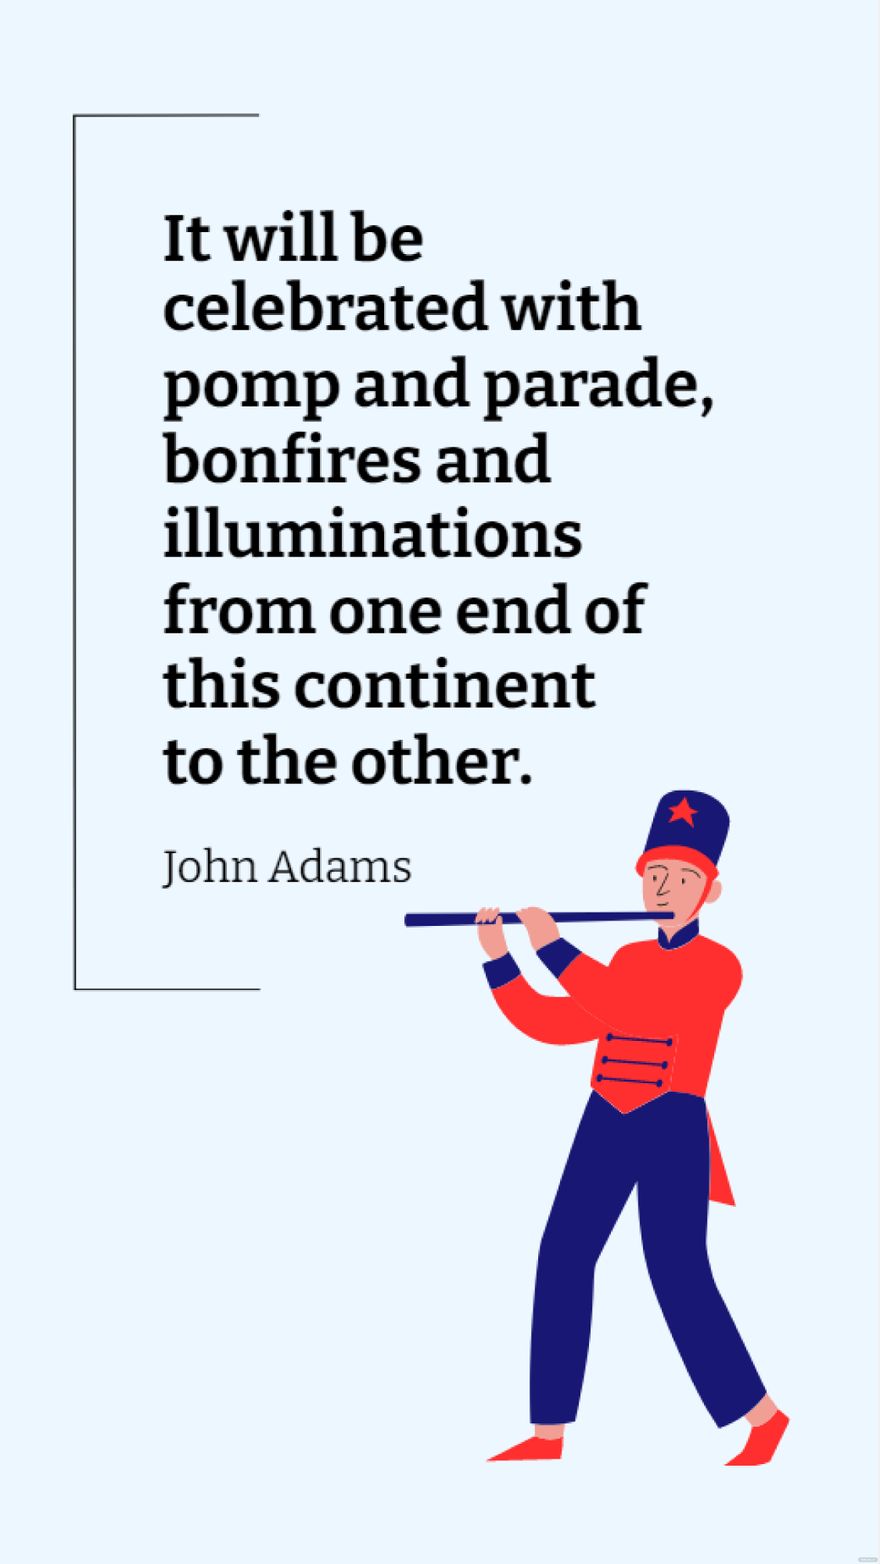 Free John Adams - It will be celebrated with pomp and parade, bonfires and illuminations from one end of this continent to the other.